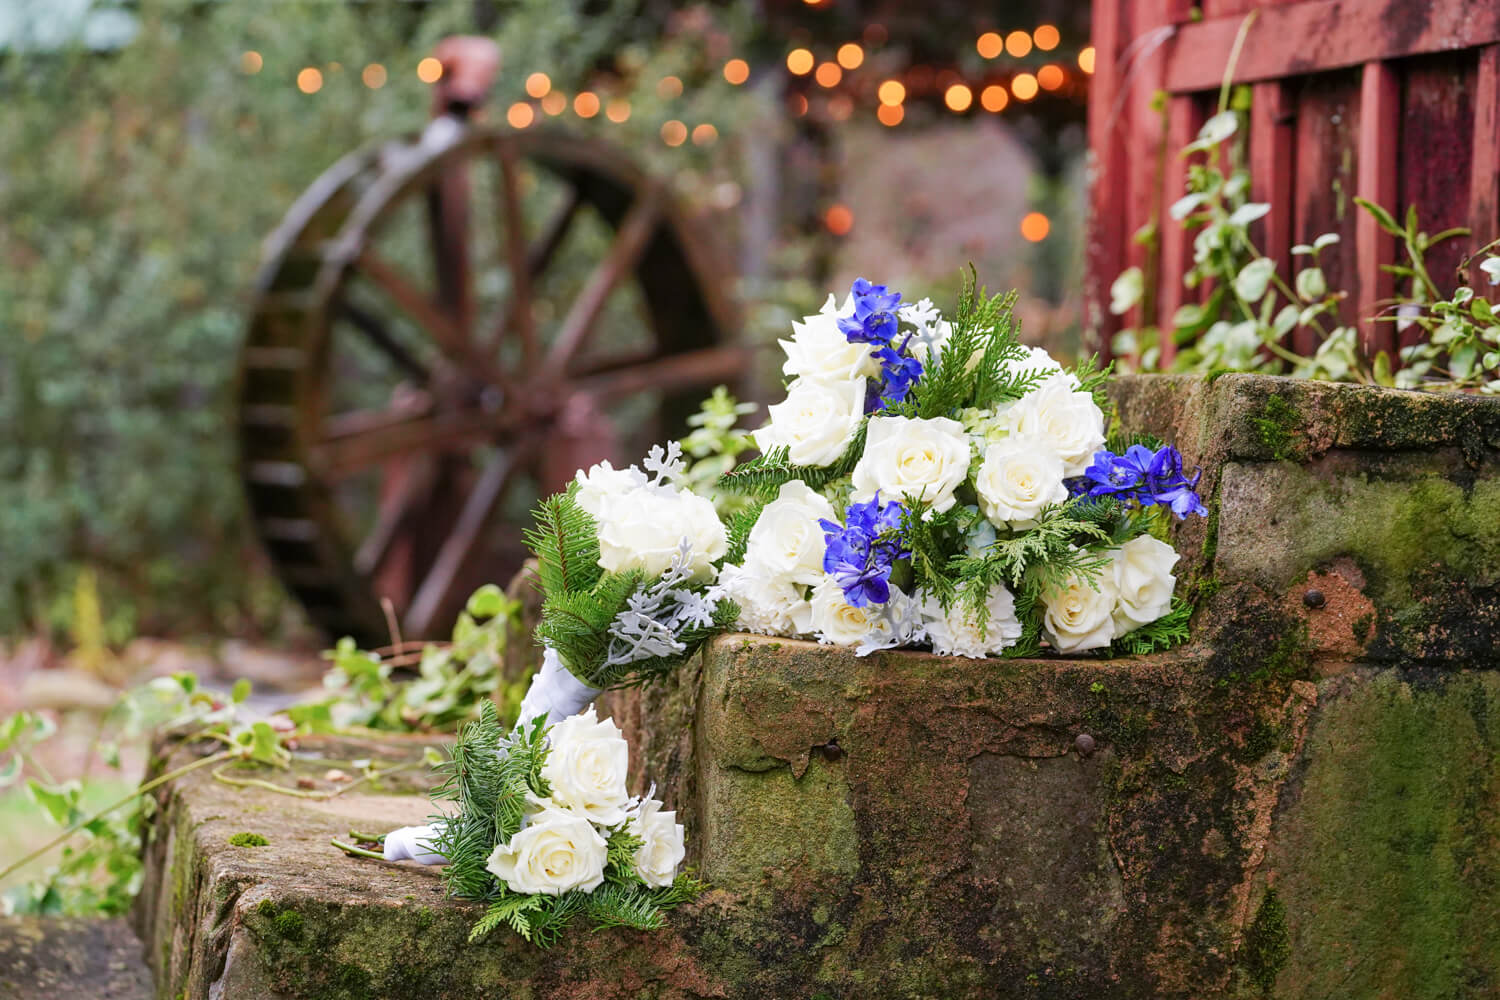 Wedding bouquet with white and blue flowers sitting on stone steps in front of a water wheel